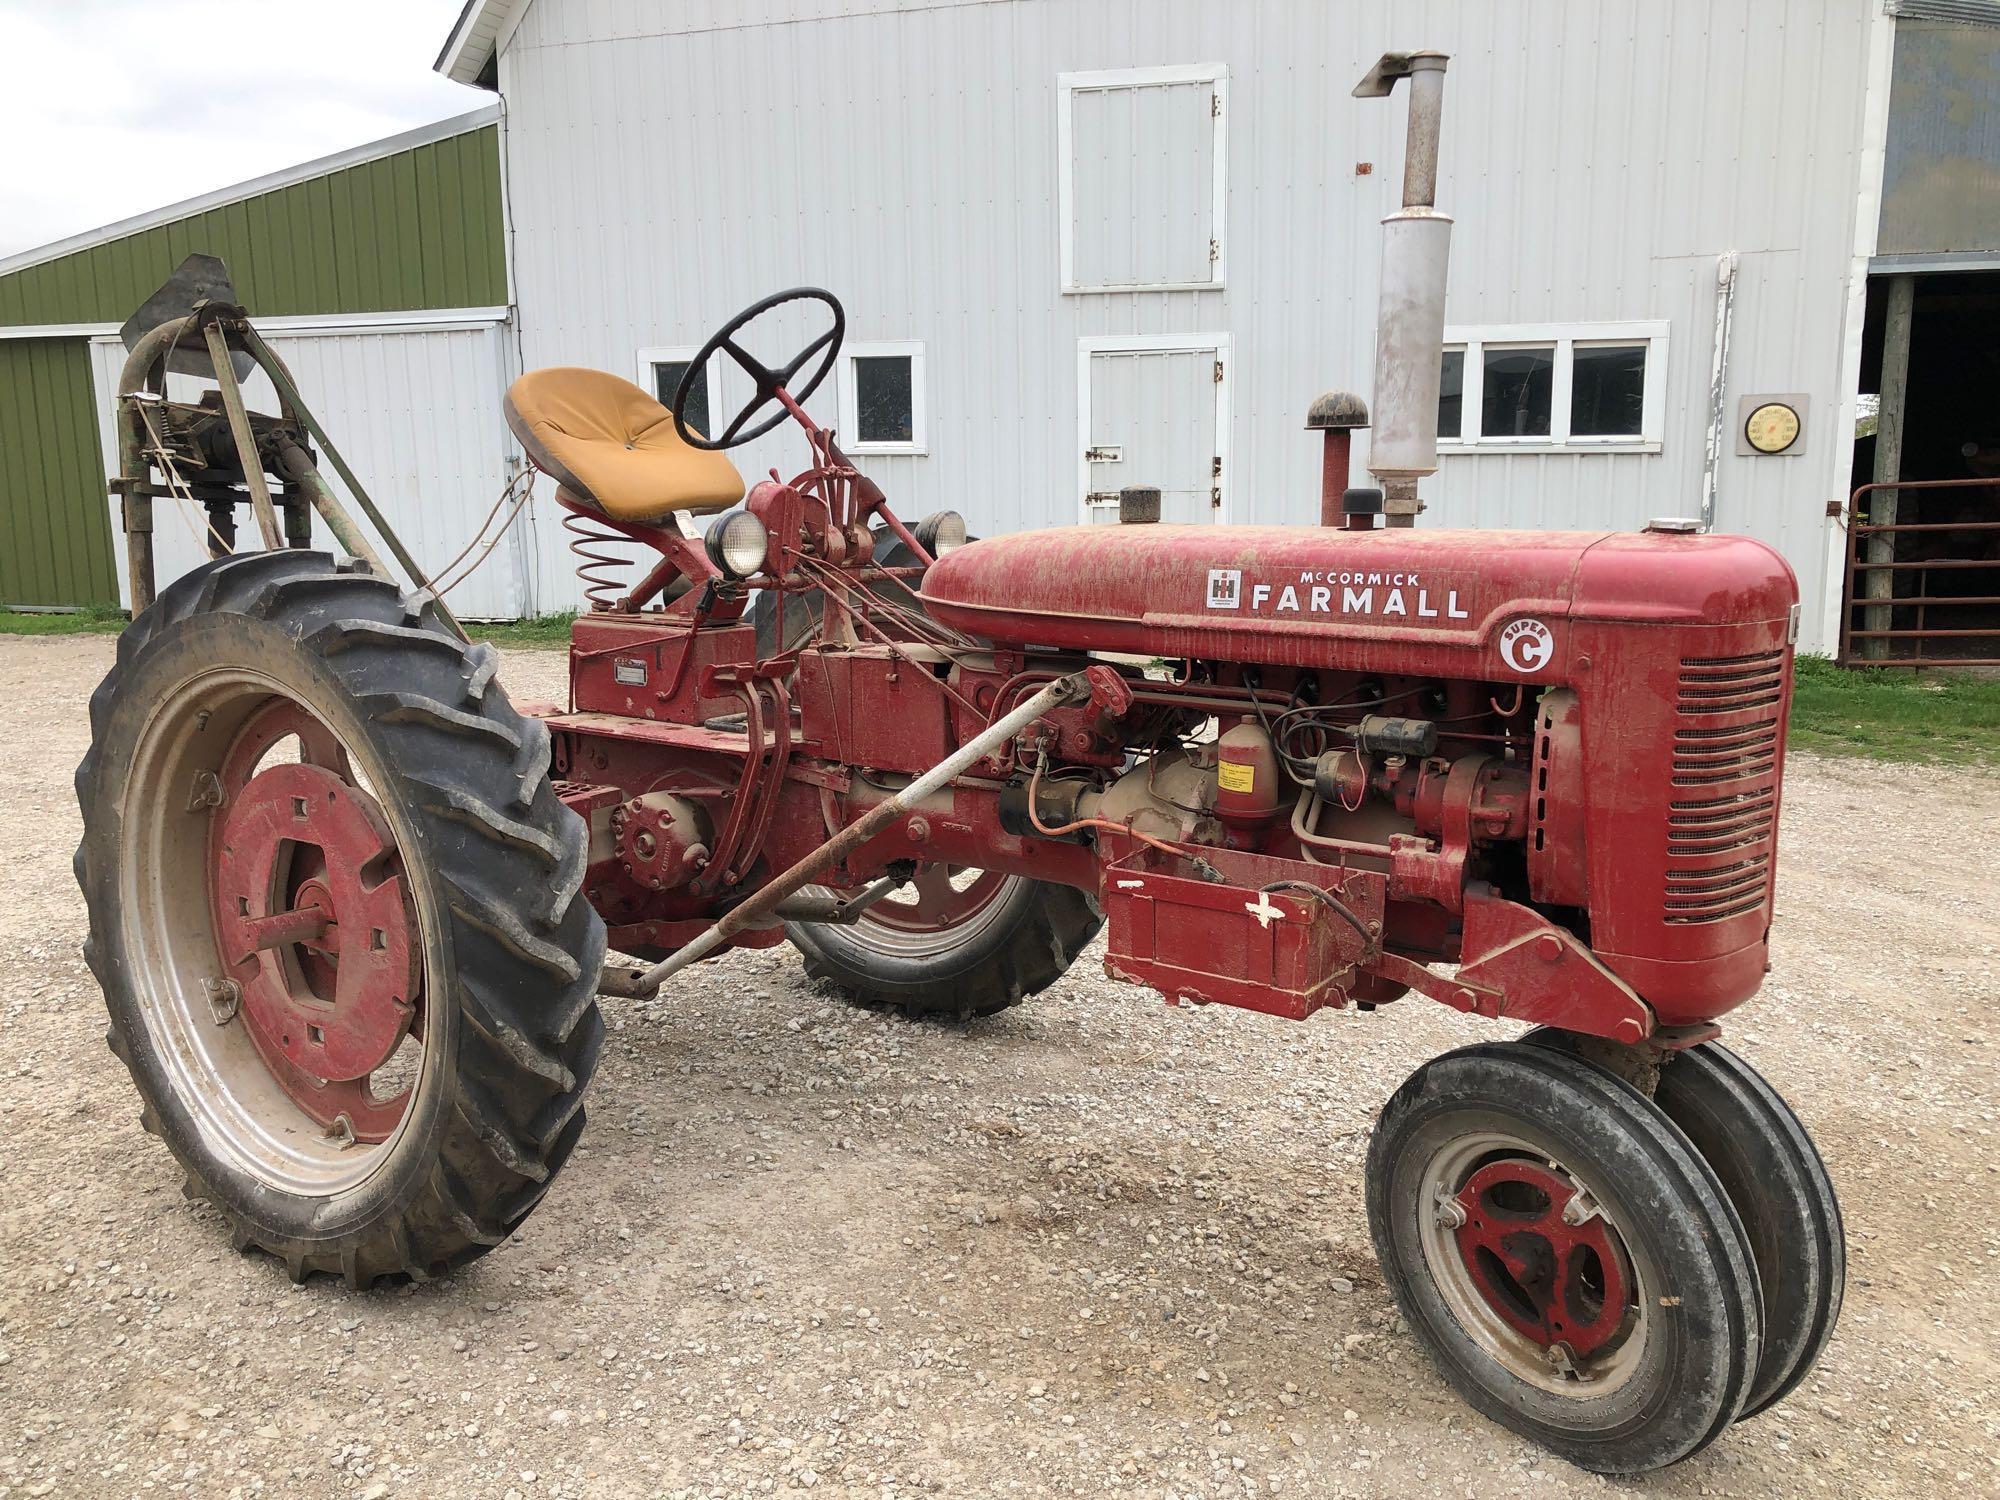 Farmall Super C Narrow Front Tractor with Post Hole Digger Attachment, Gas, SN:132987